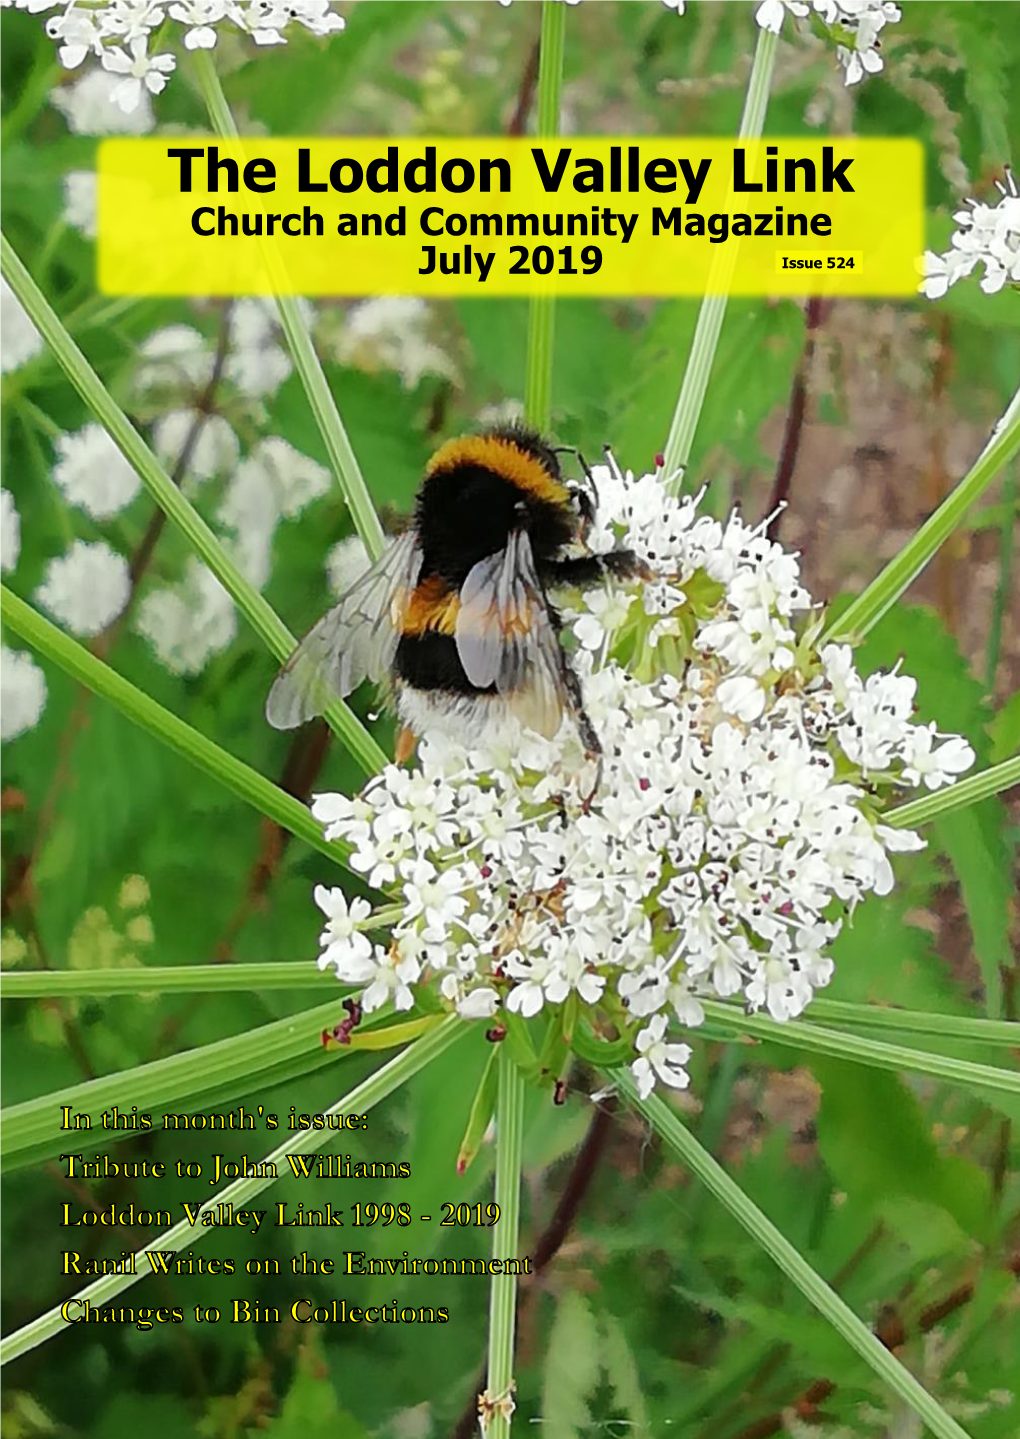 The Loddon Valley Link Church and Community Magazine July 2019 Issue 524